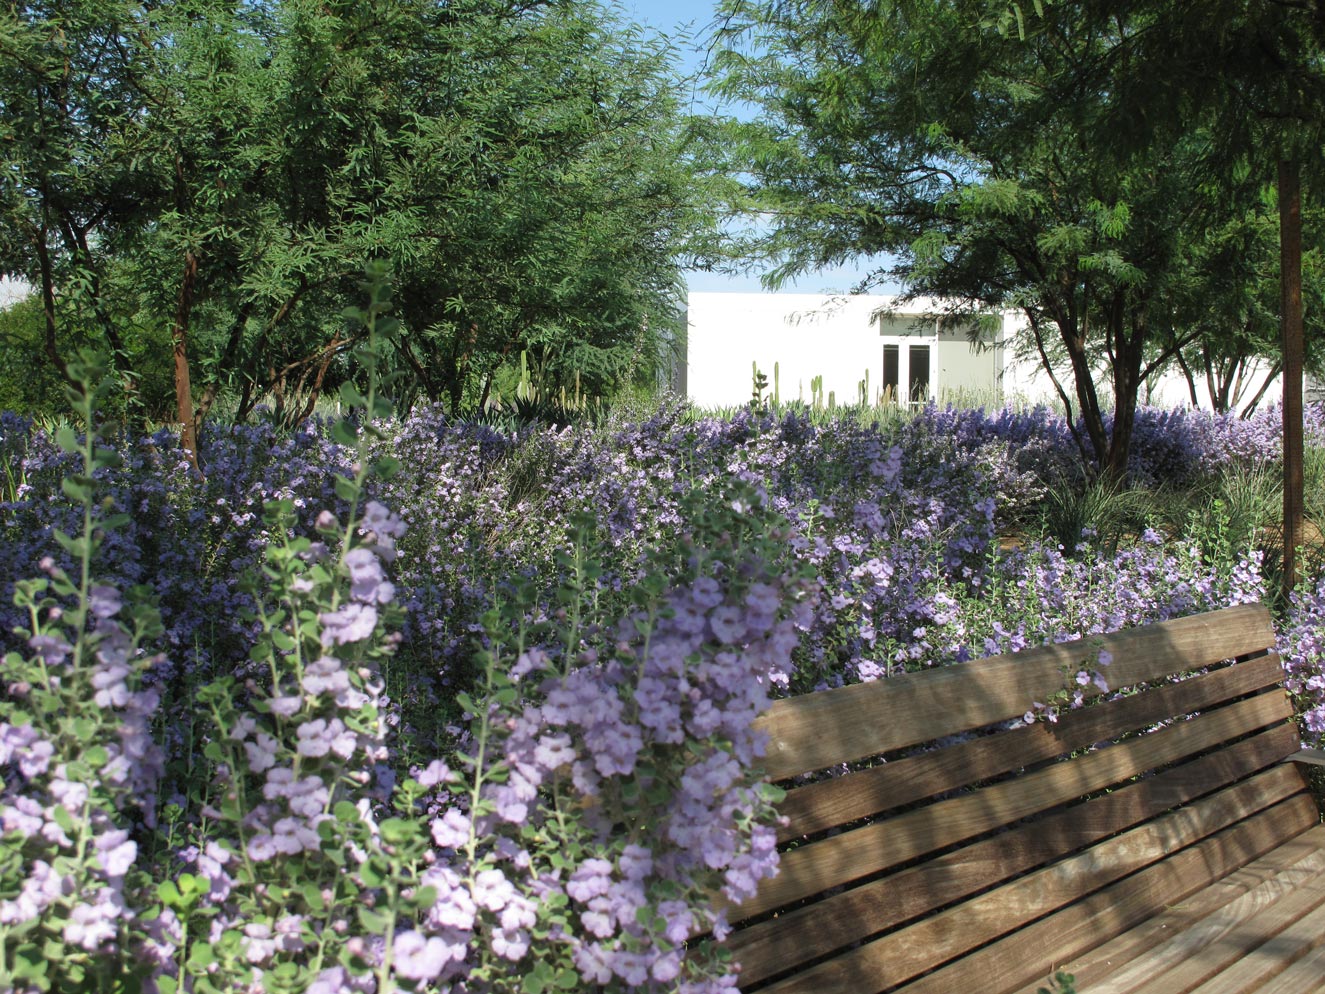 Blooming leucophyllum surround a bench at Sunnylands Center & Gardens. The White Center building is visible in the background.